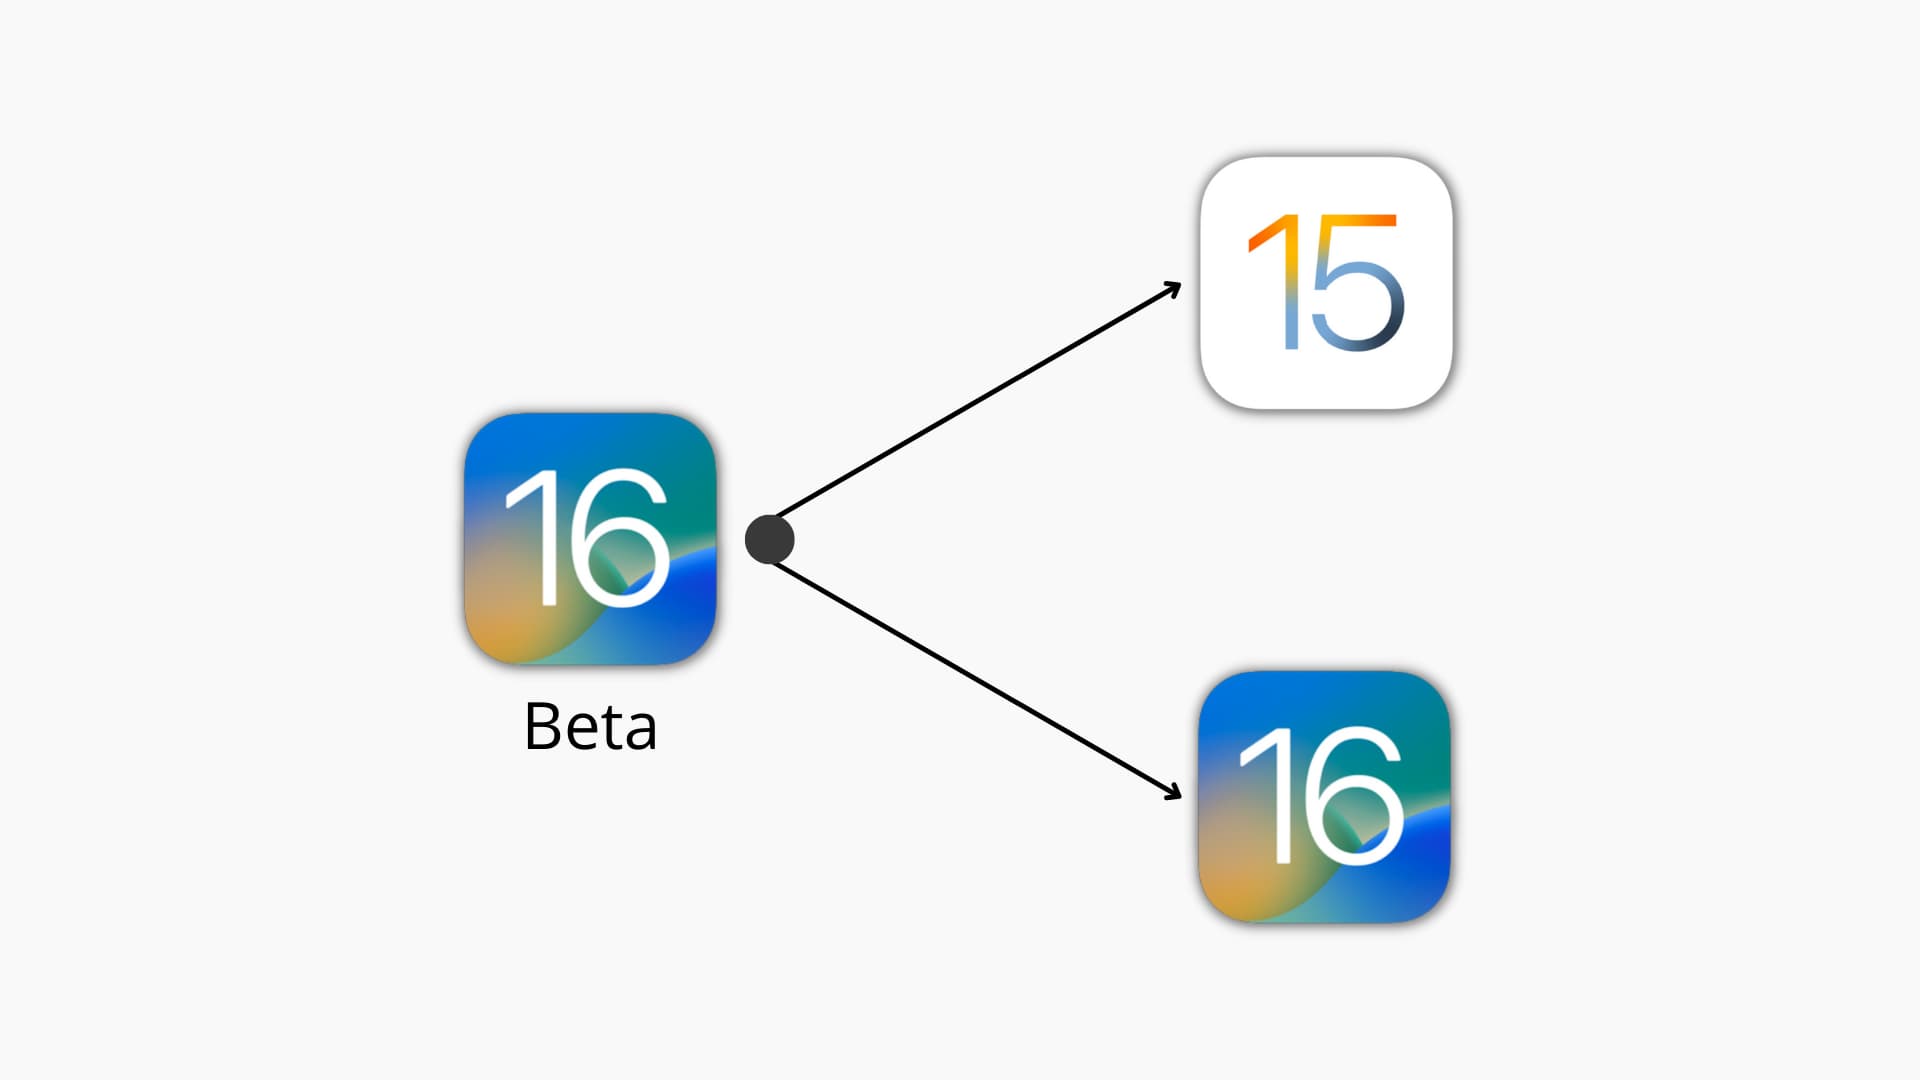 Switch from iOS 16 beta to iOS 15 or iOS 16 public release